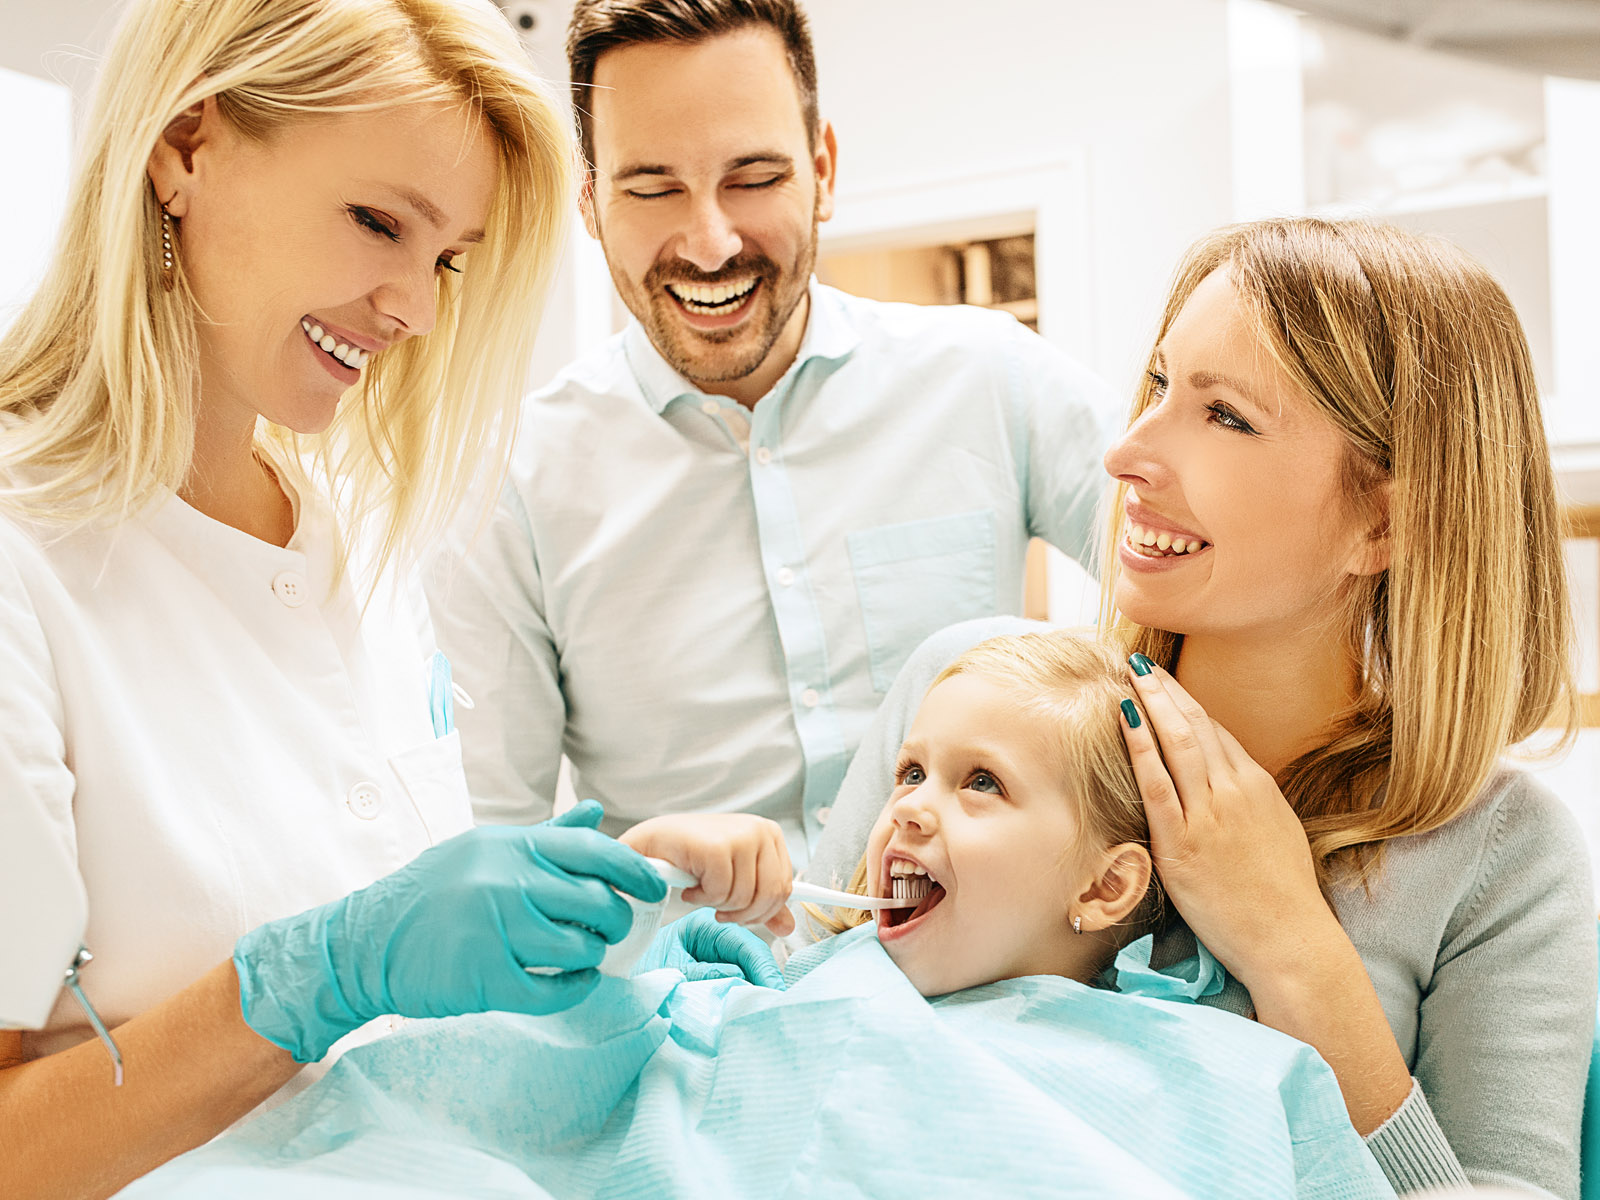 What causes tooth decay in baby teeth?